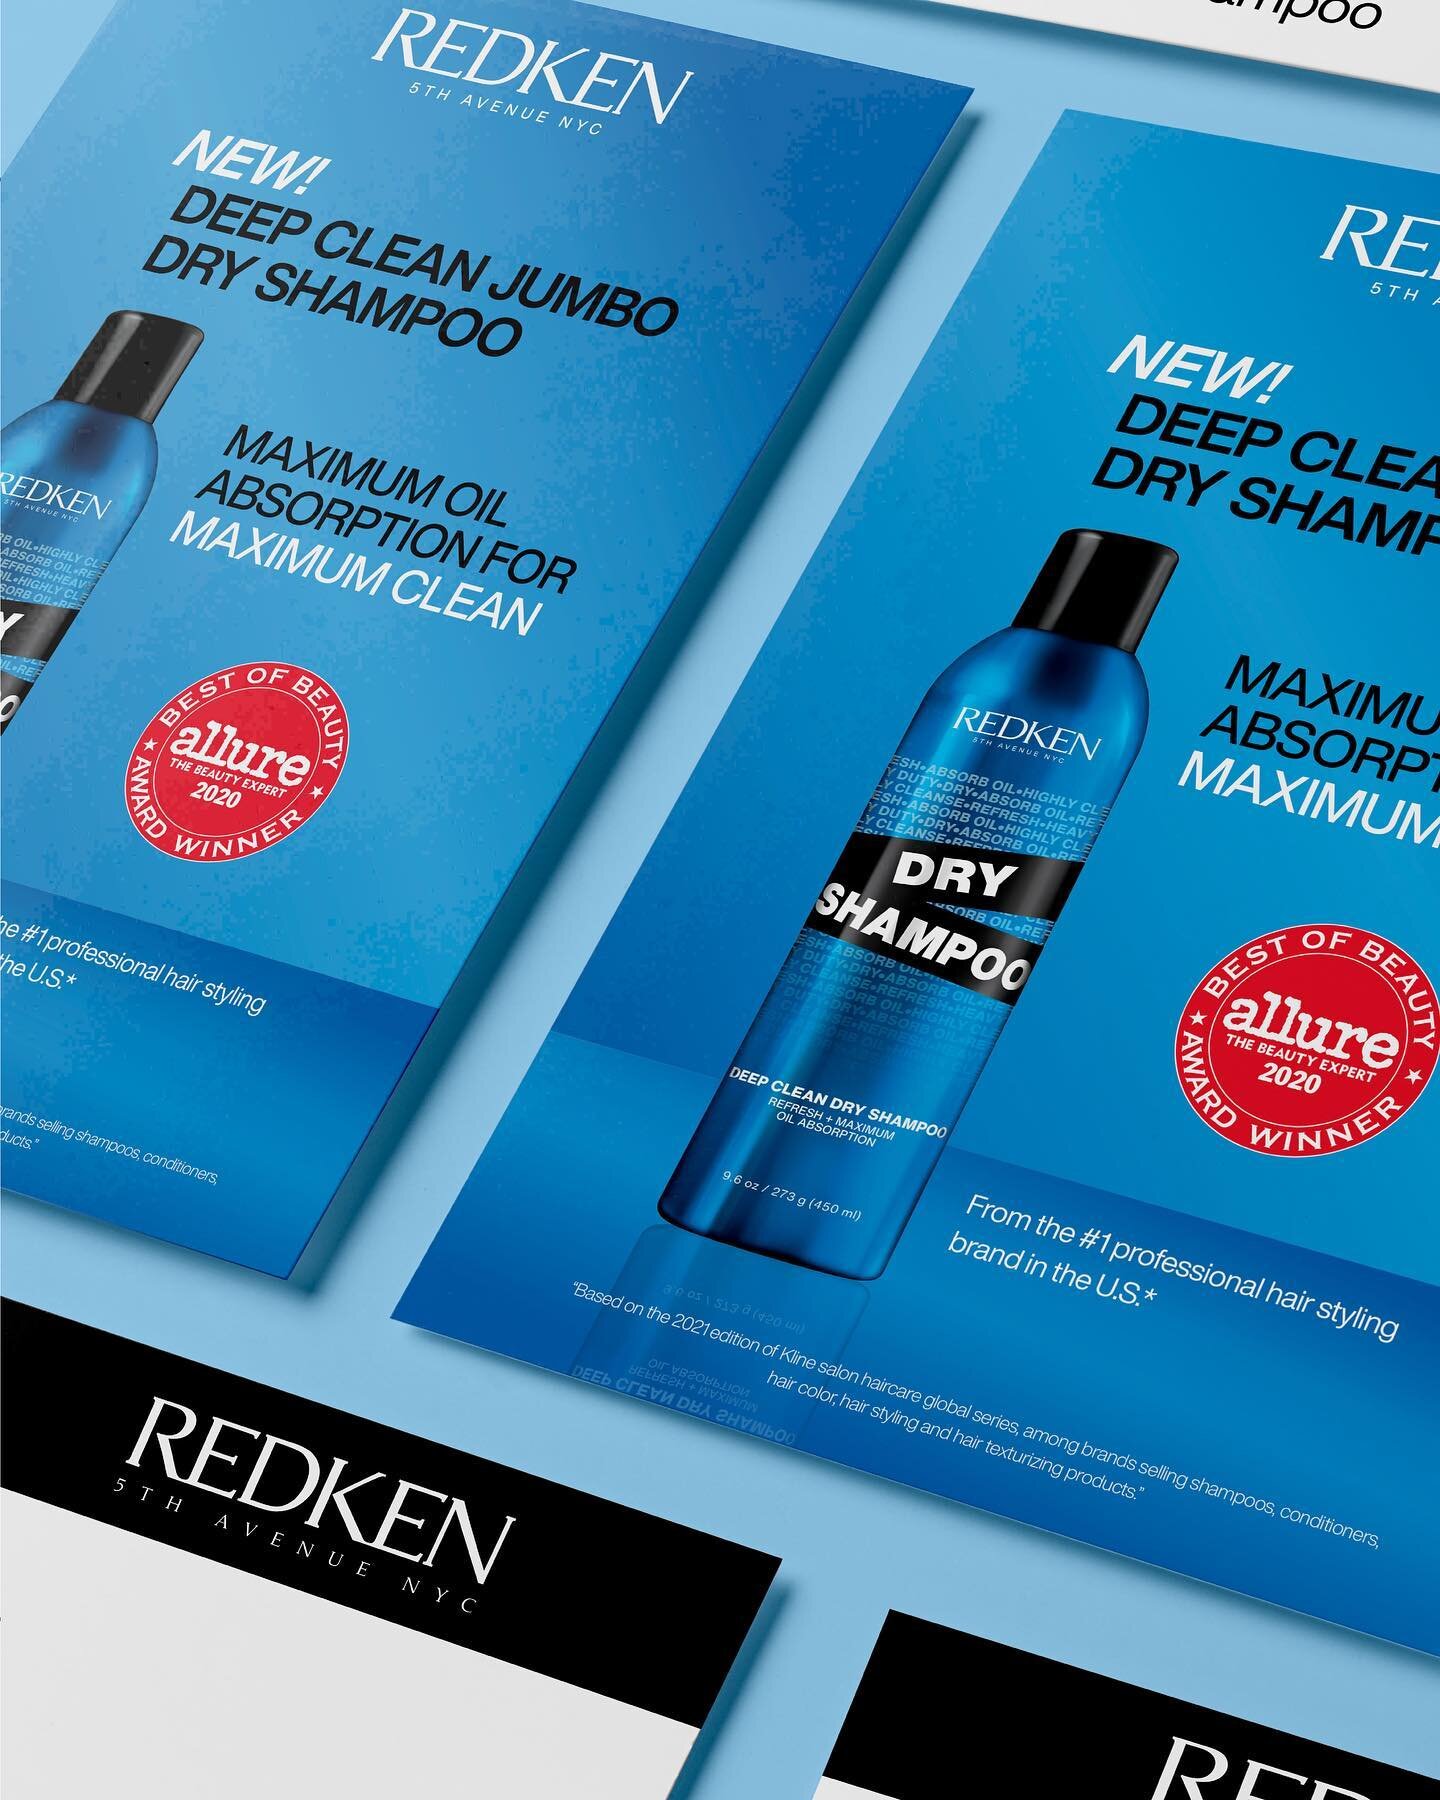 Redken&rsquo;s May &lsquo;22 JUMBO Dry Shampoo postcard and box 💙💨

One of the more slender box designs I&rsquo;ve done, to create the perfect pocket for the iconic Dry Shampoo. 🤩

And can&rsquo;t forget the Handwritten Postcard! Deep Clean design